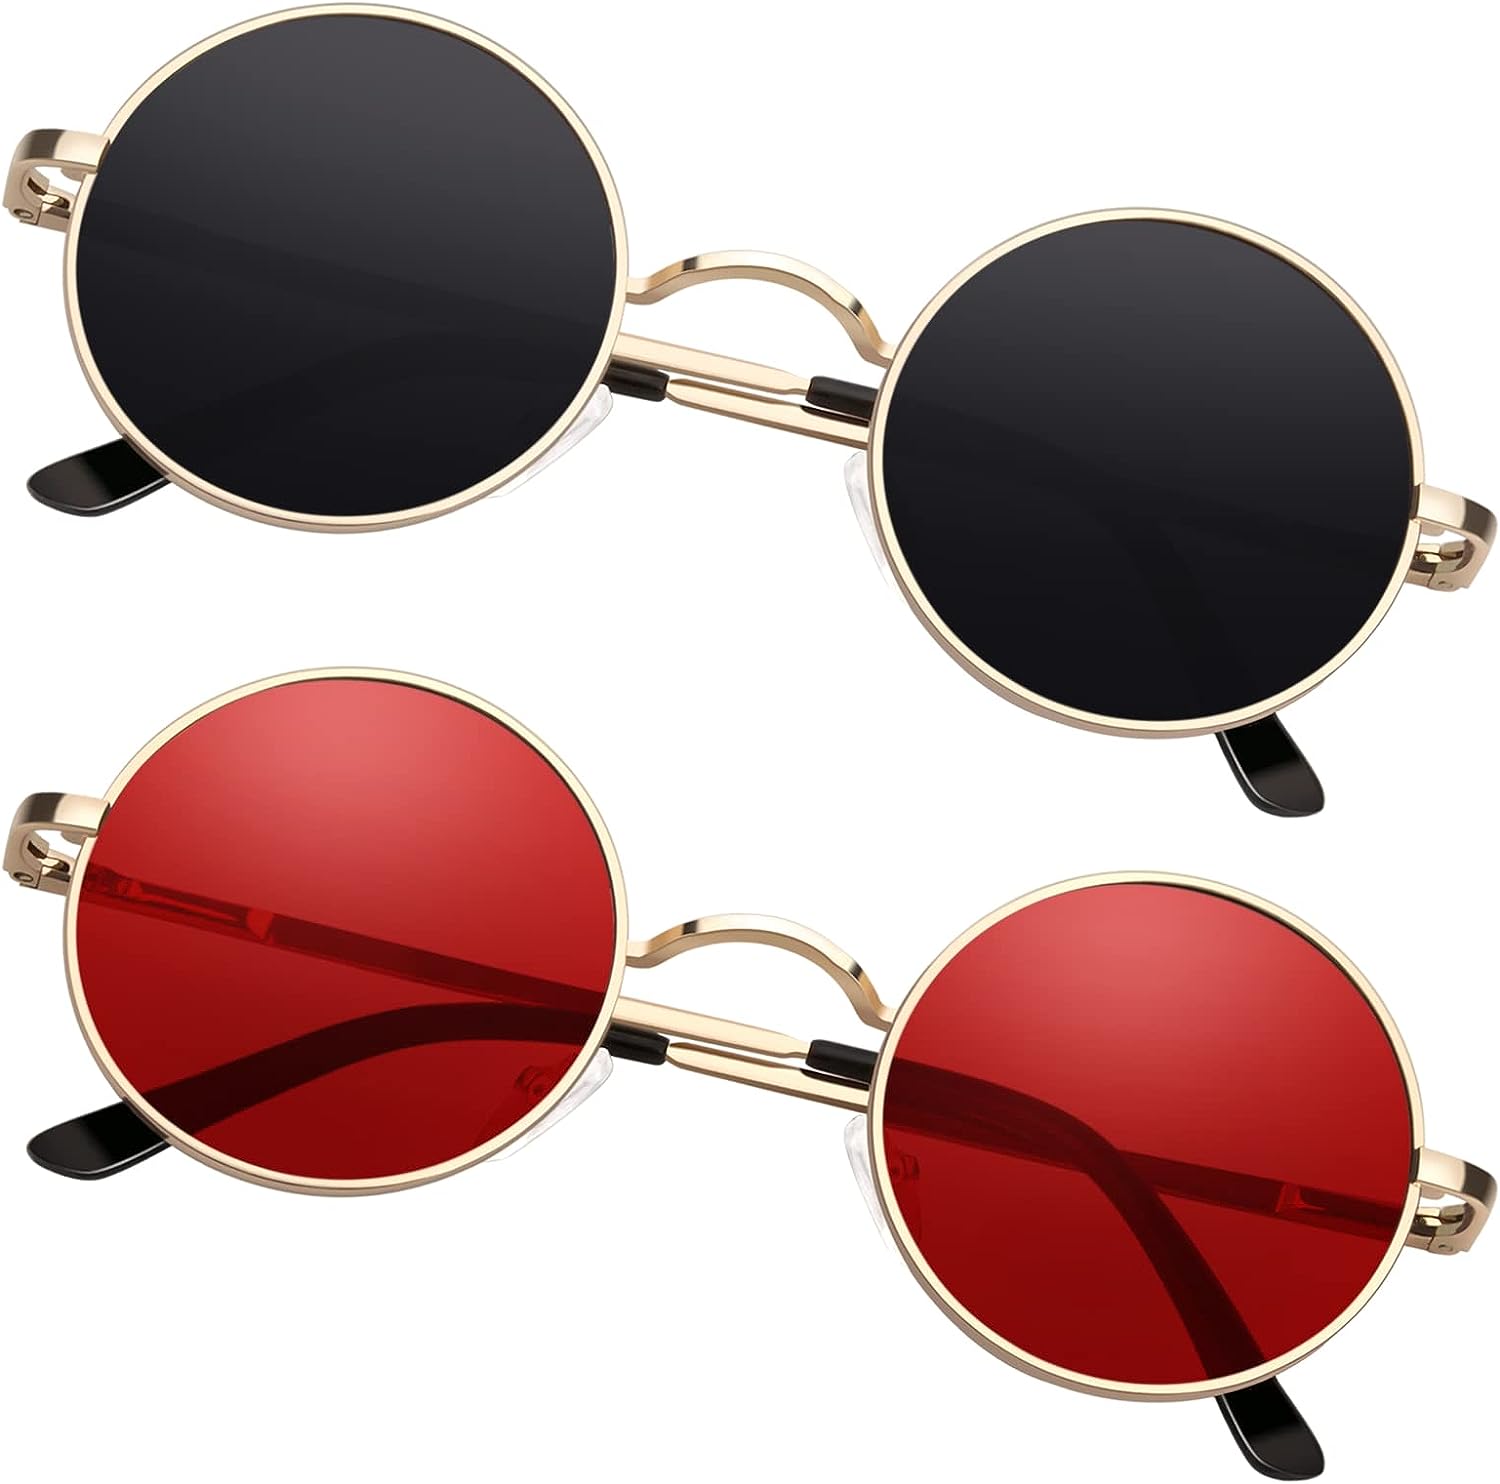  Sunier Small Round Sunglasses Men Women Shades Polarized Hippie  Retro Circle Sun Glasses, Black Frame Clear Red Colored Lens : Clothing,  Shoes & Jewelry